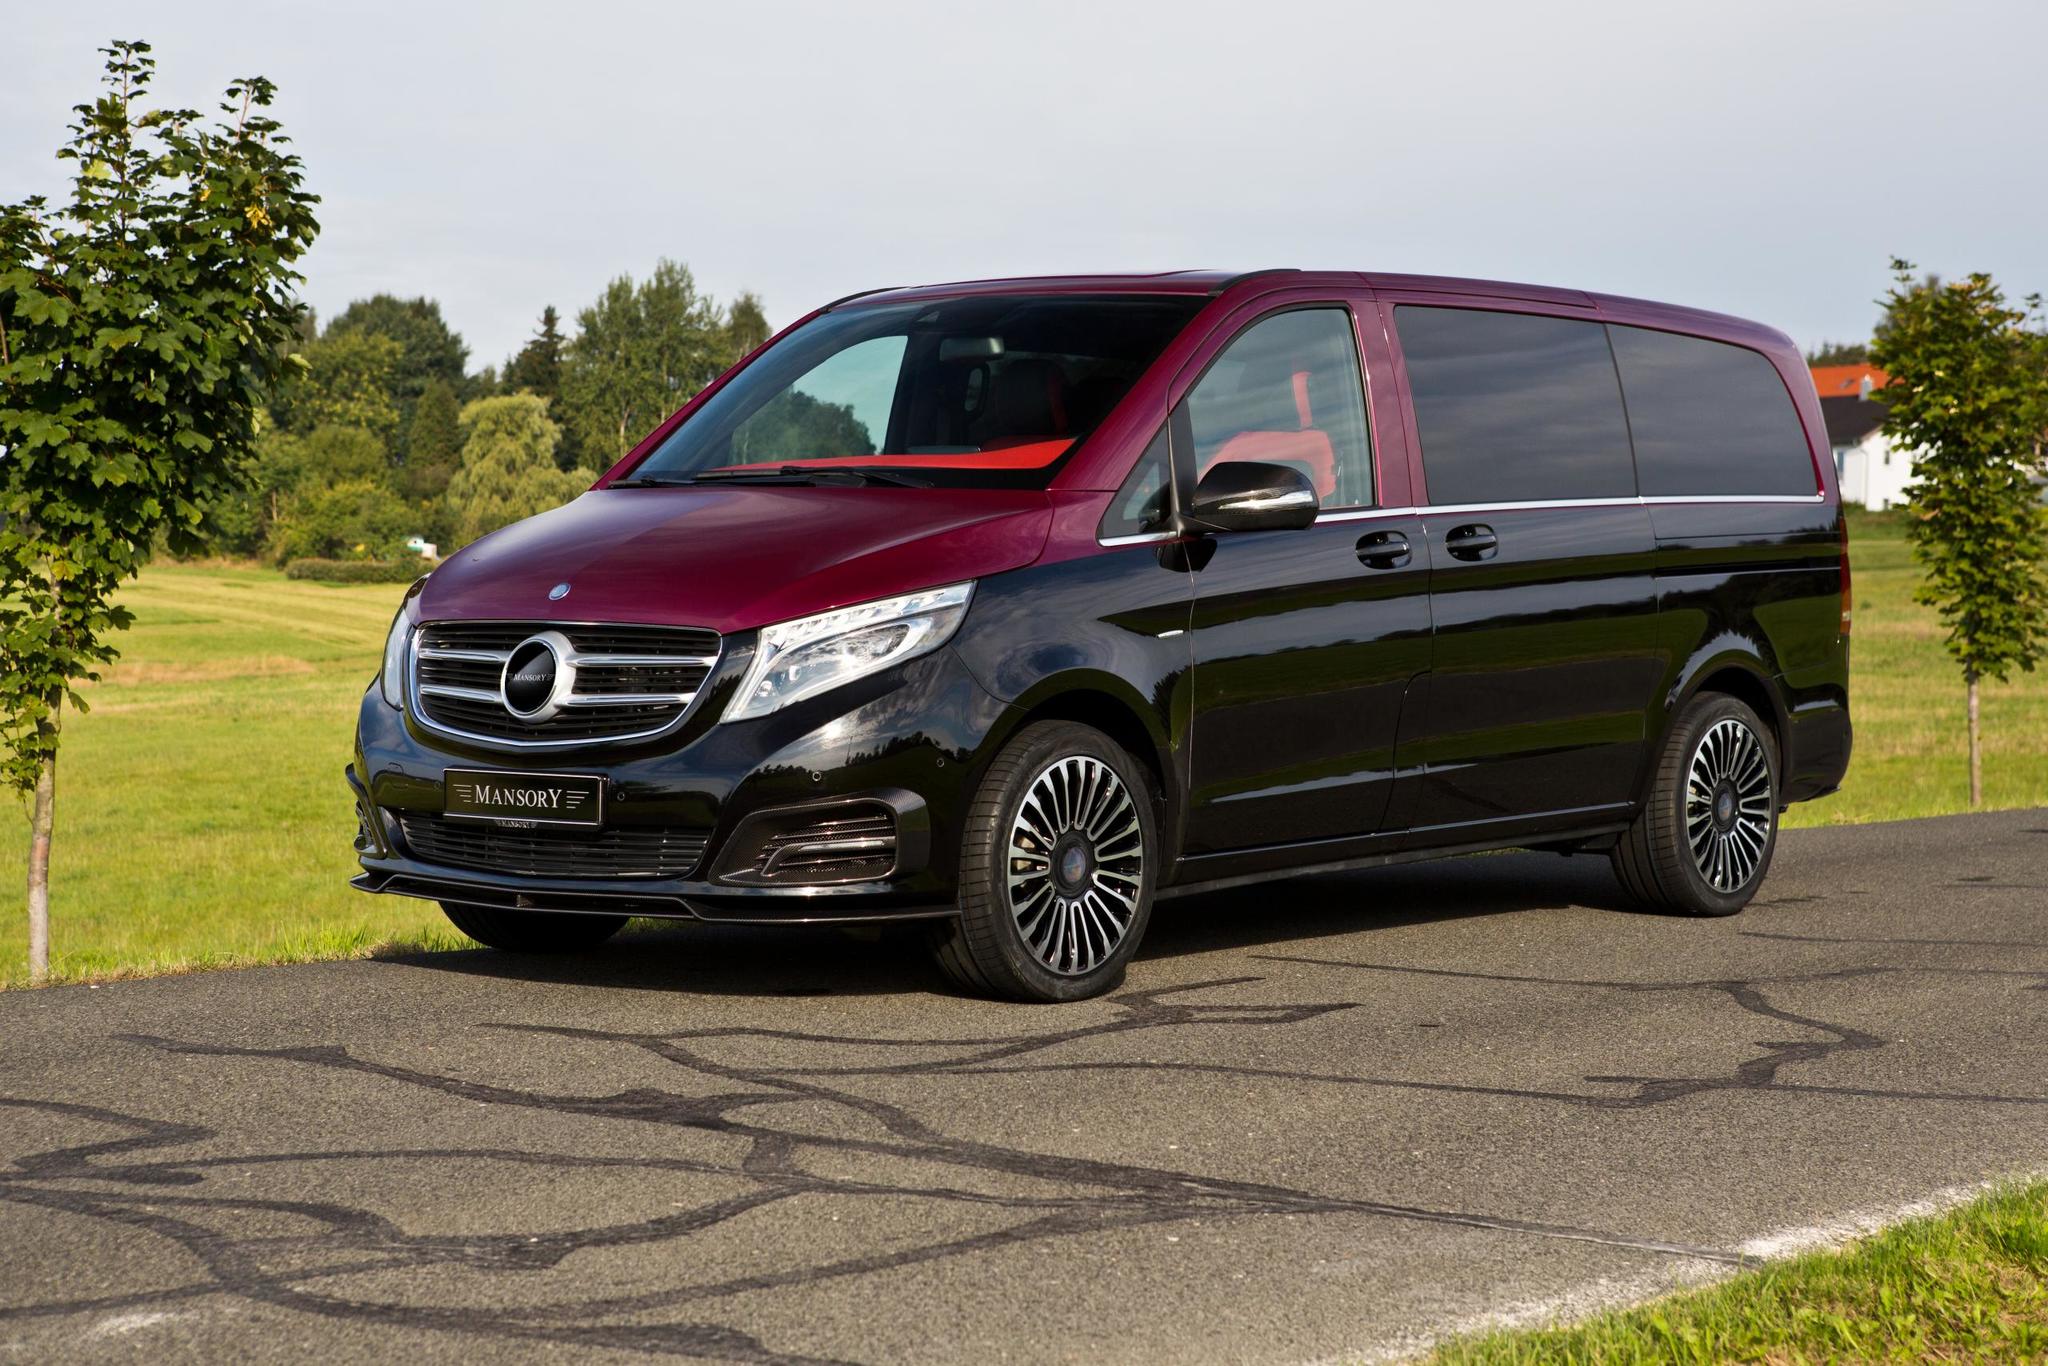 Mansory body kit for Mercedes-Benz V-Class carbon